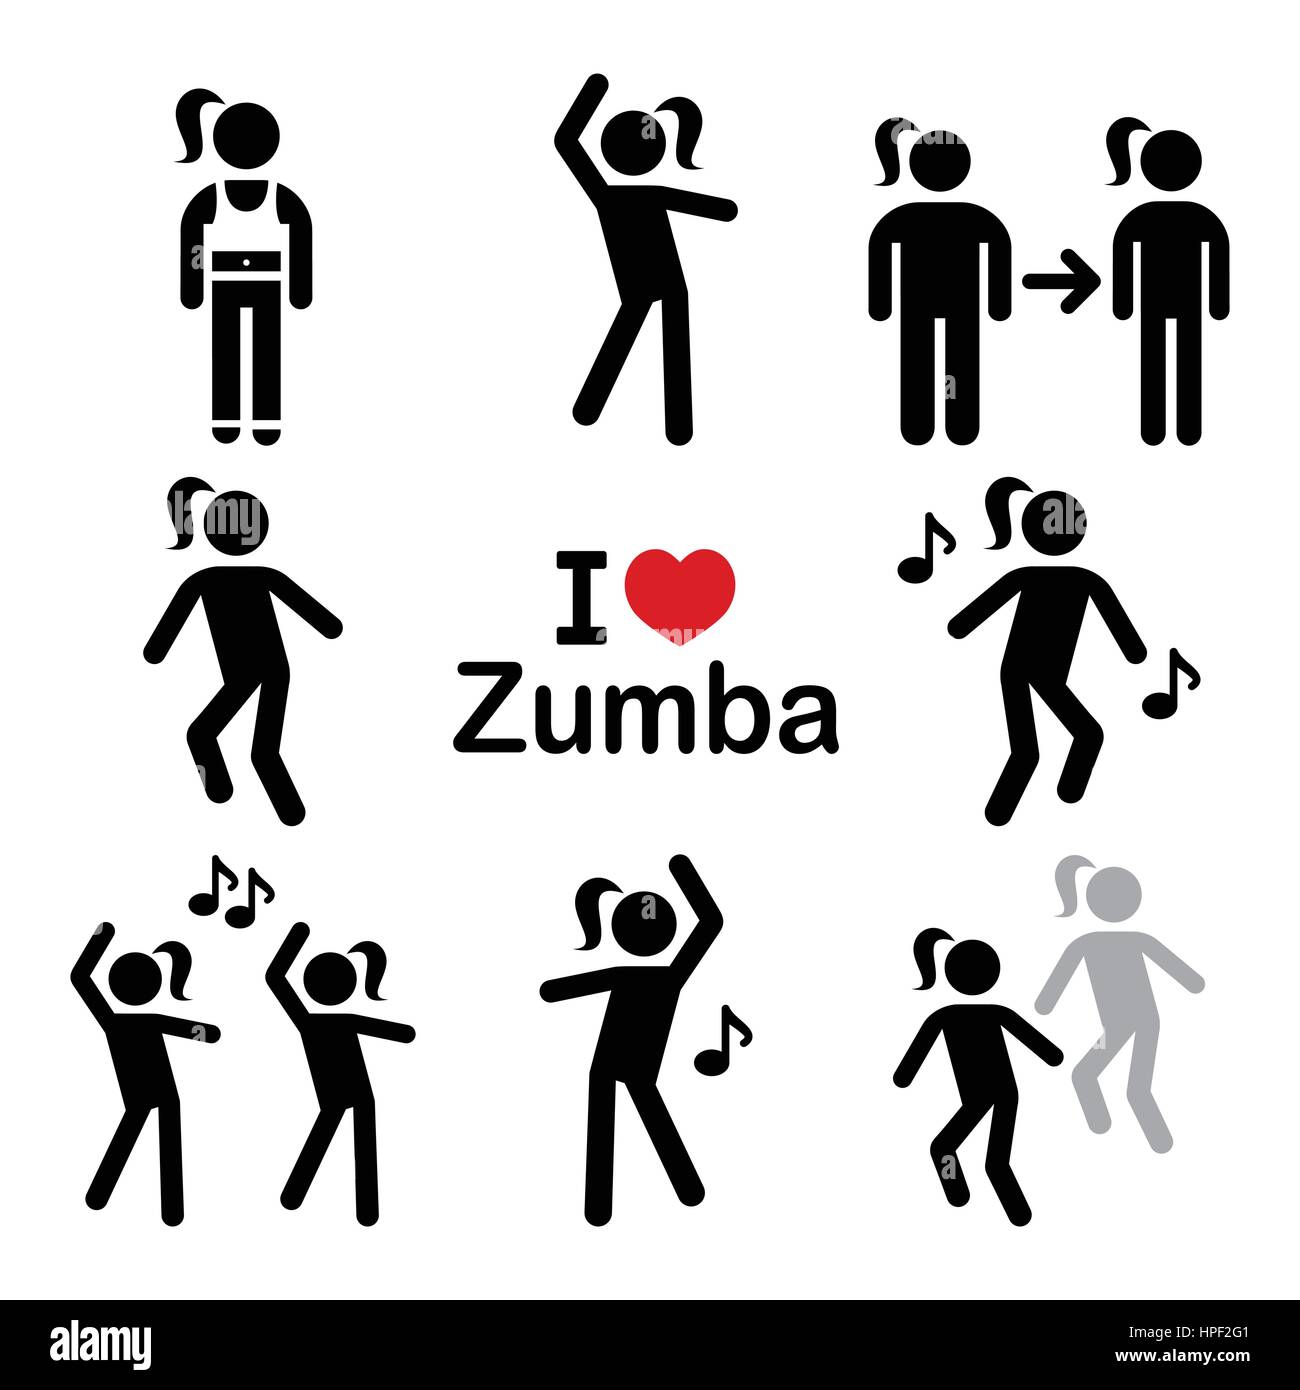 Zumba dance, workout fitness icons set Stock Vector